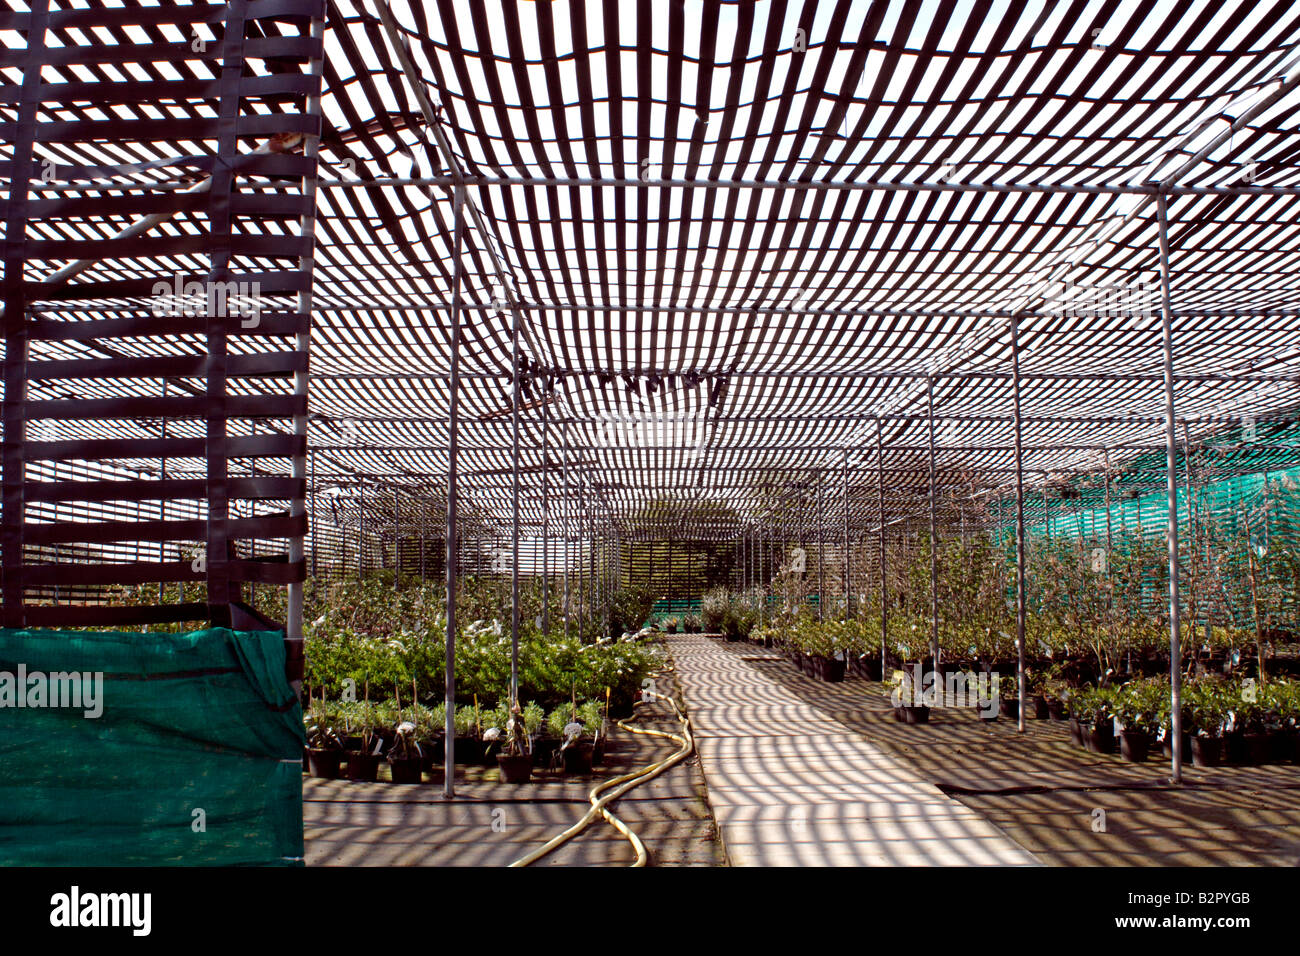 Hardy nursery stock being grown in a shade house, UK Stock Photo